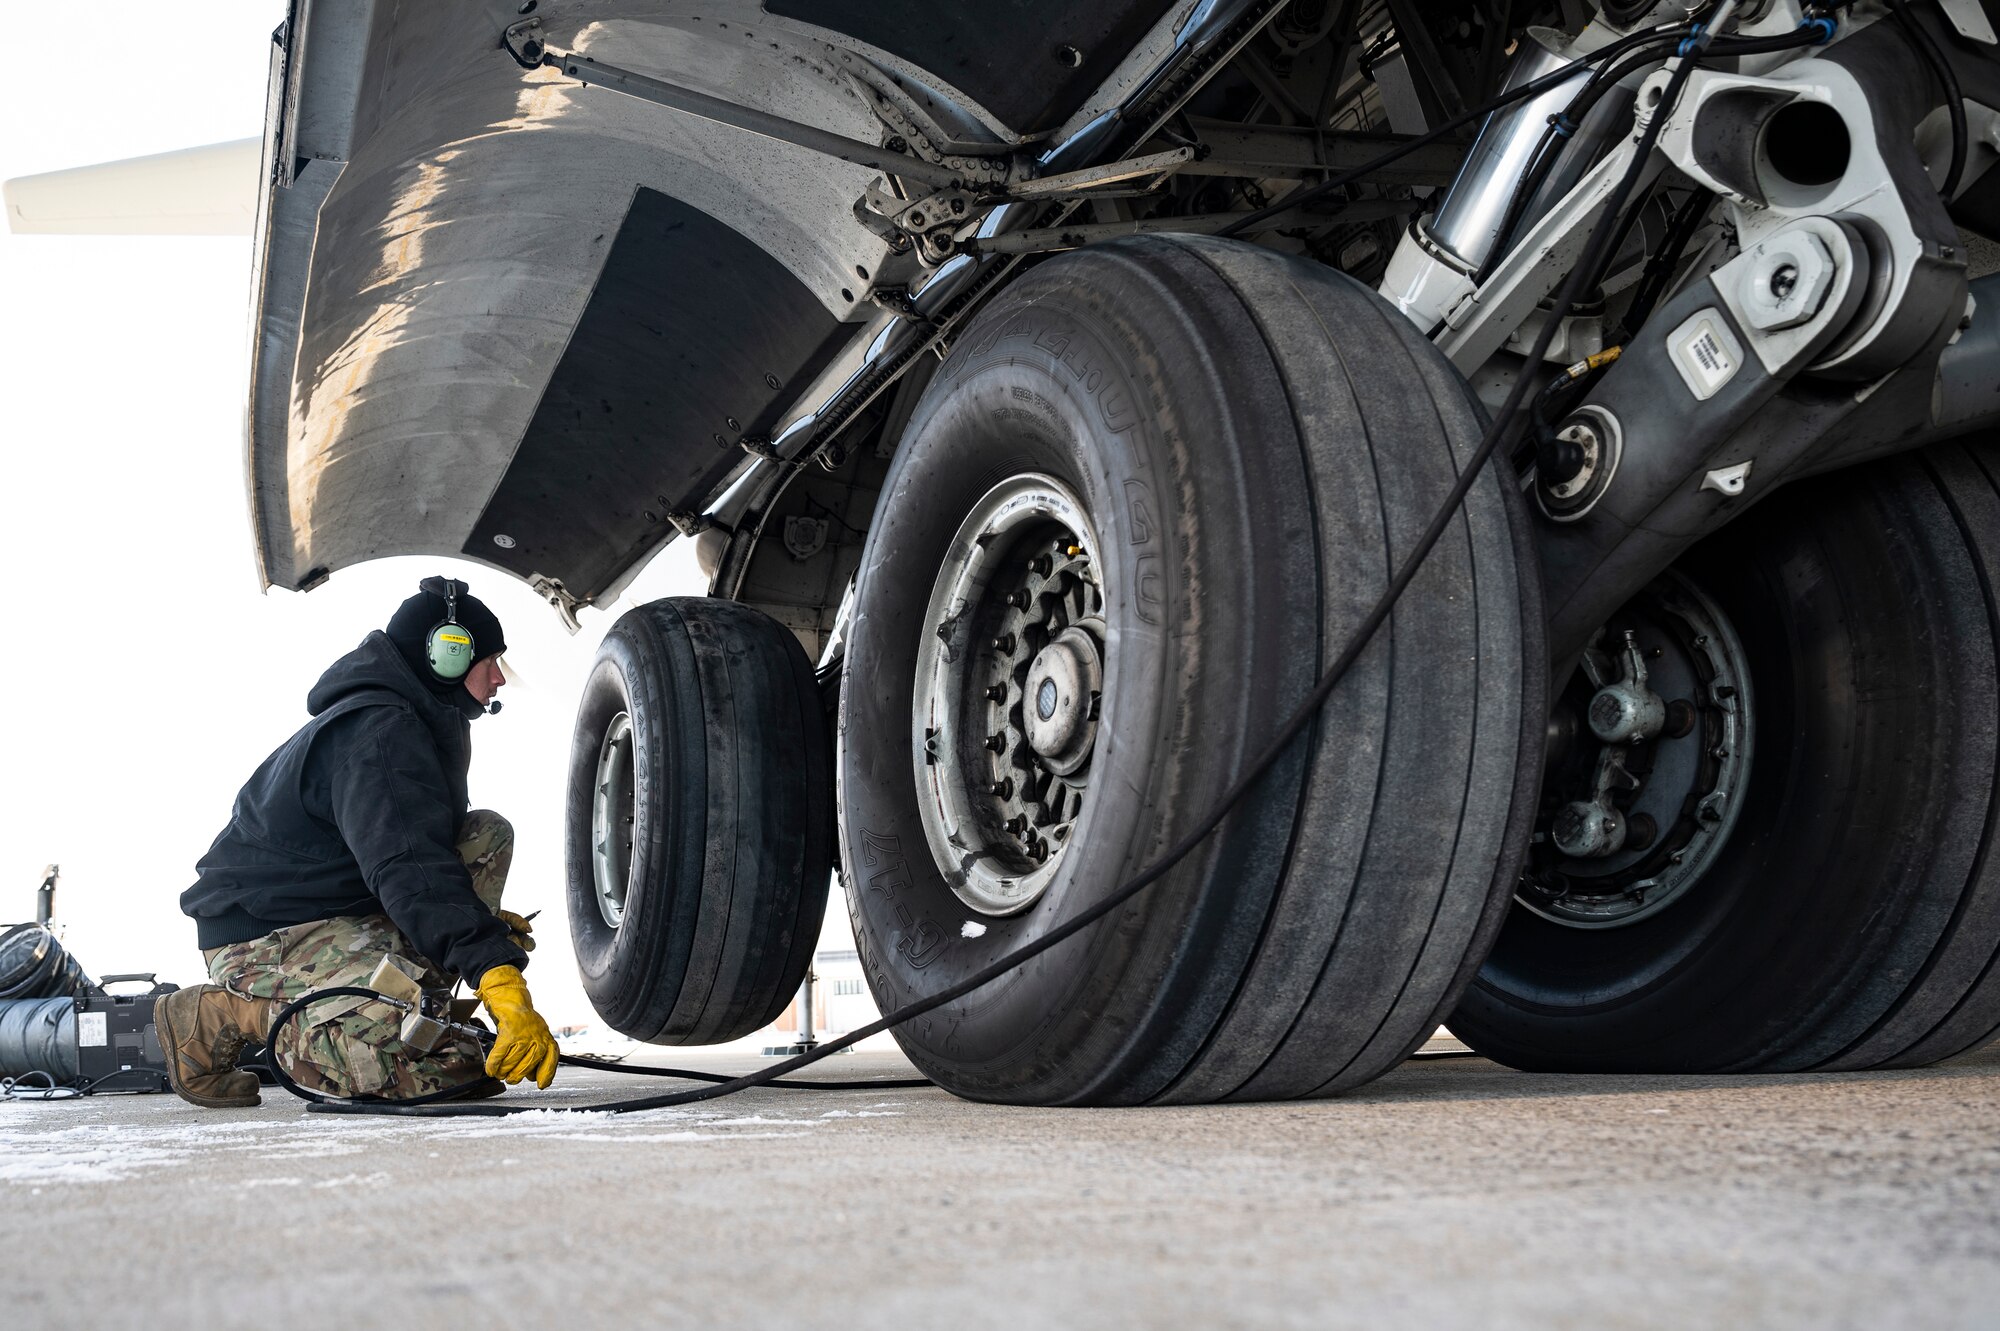 Master Sgt. John Thompson, 911th Aircraft Maintenance Squadron crew chief, raises the back part of the landing gear while preparing to change a tire on a C-17 Globemaster III at the Pittsburgh International Airport Air Reserve Station, Pennsylvania, Jan. 11, 2022.